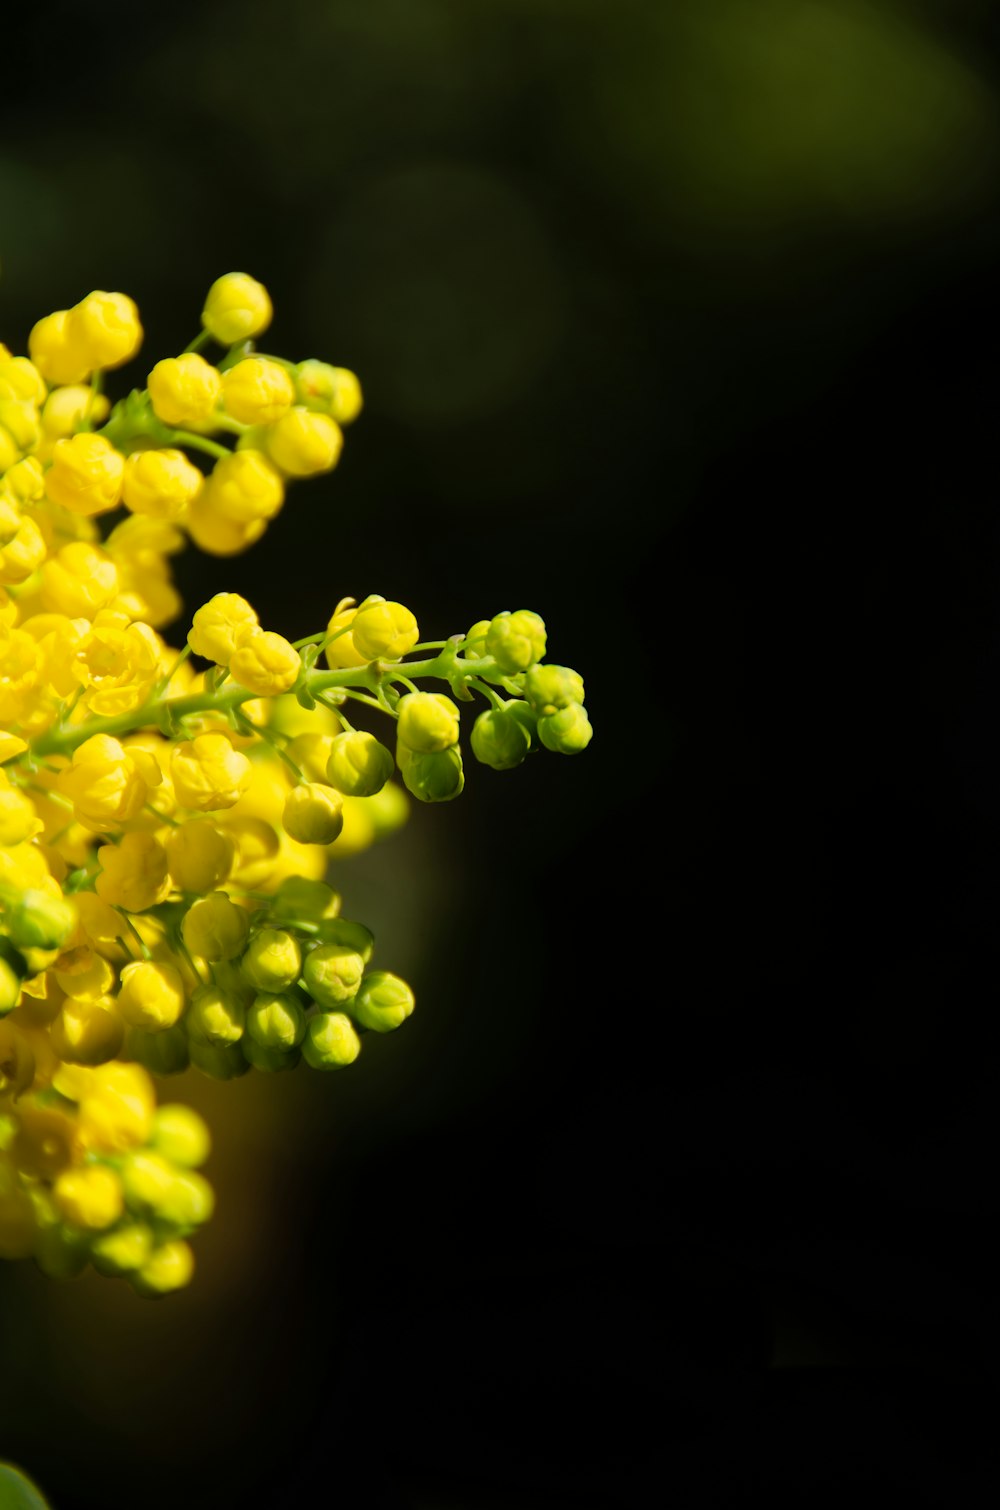 a close up of a yellow flower on a tree